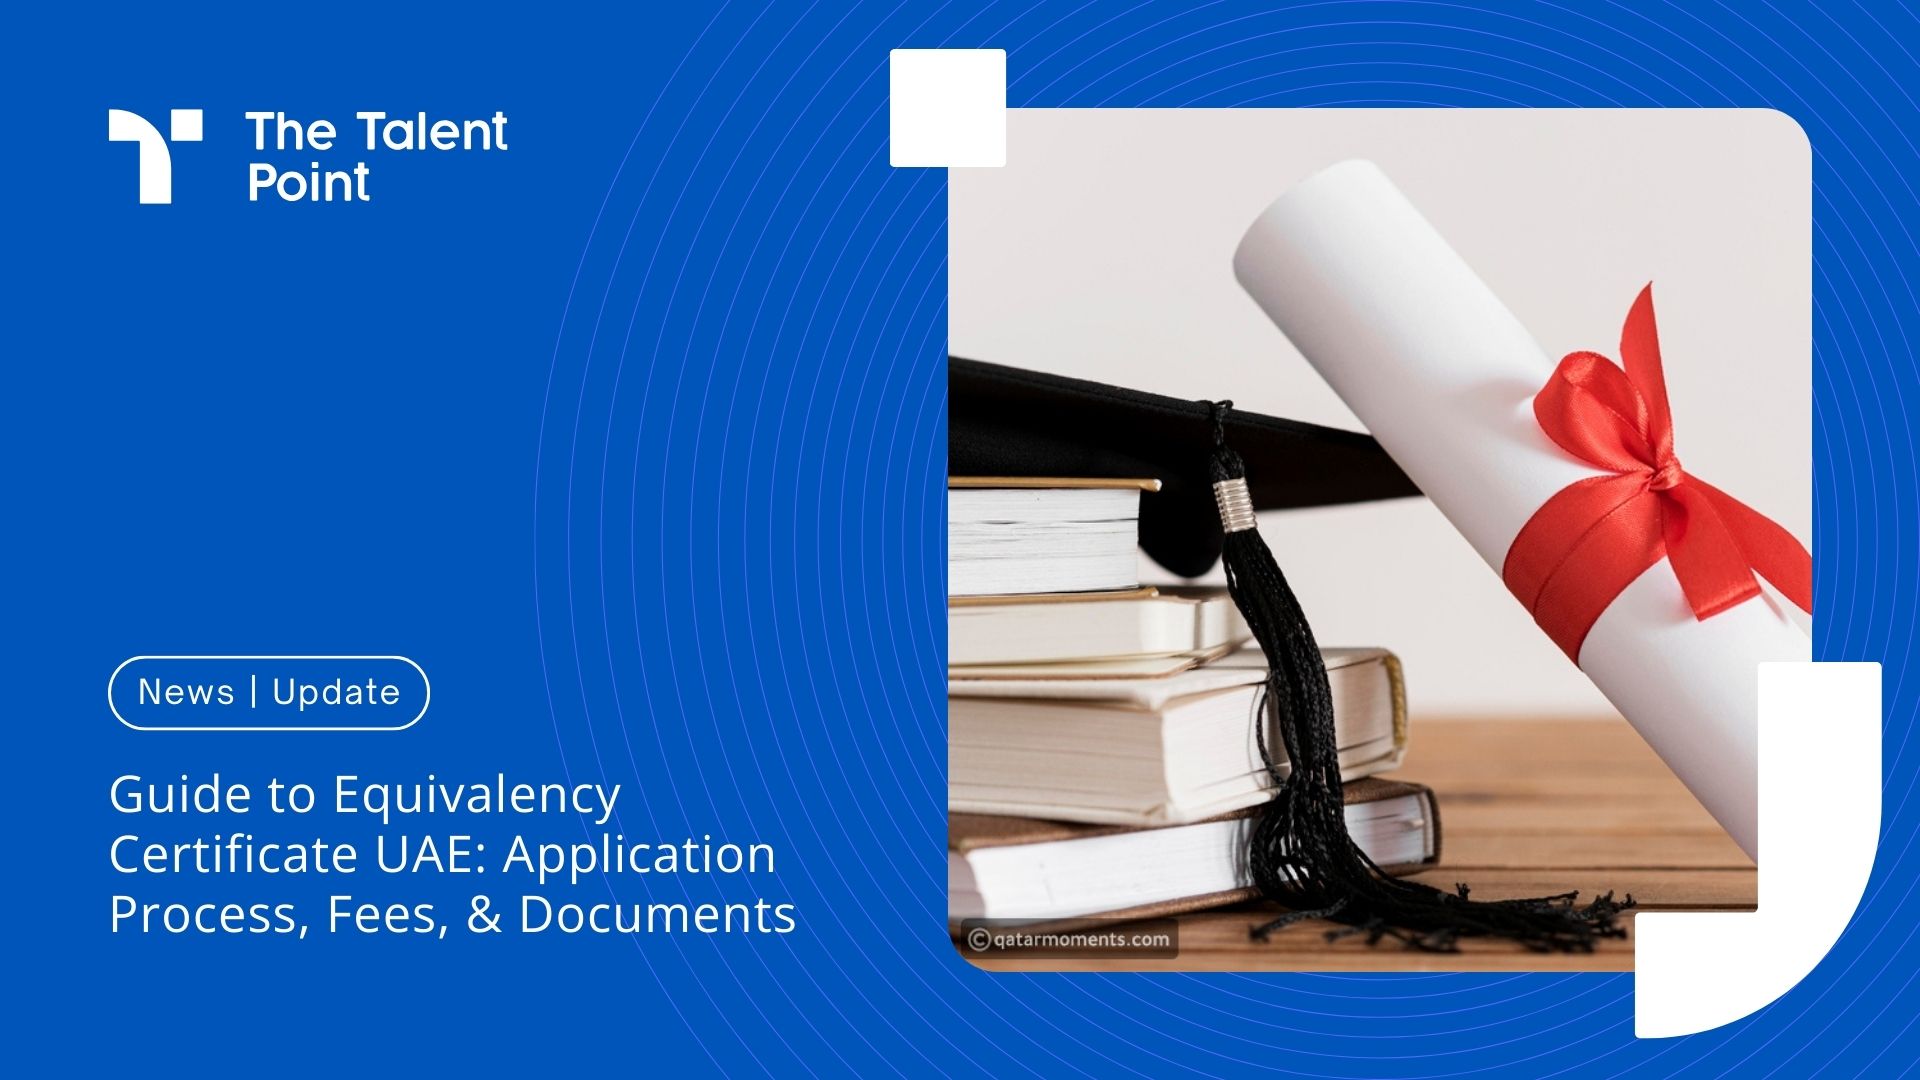 Guide to Equivalency Certificate UAE: Application Process, Fees & Documents - TalentPoint